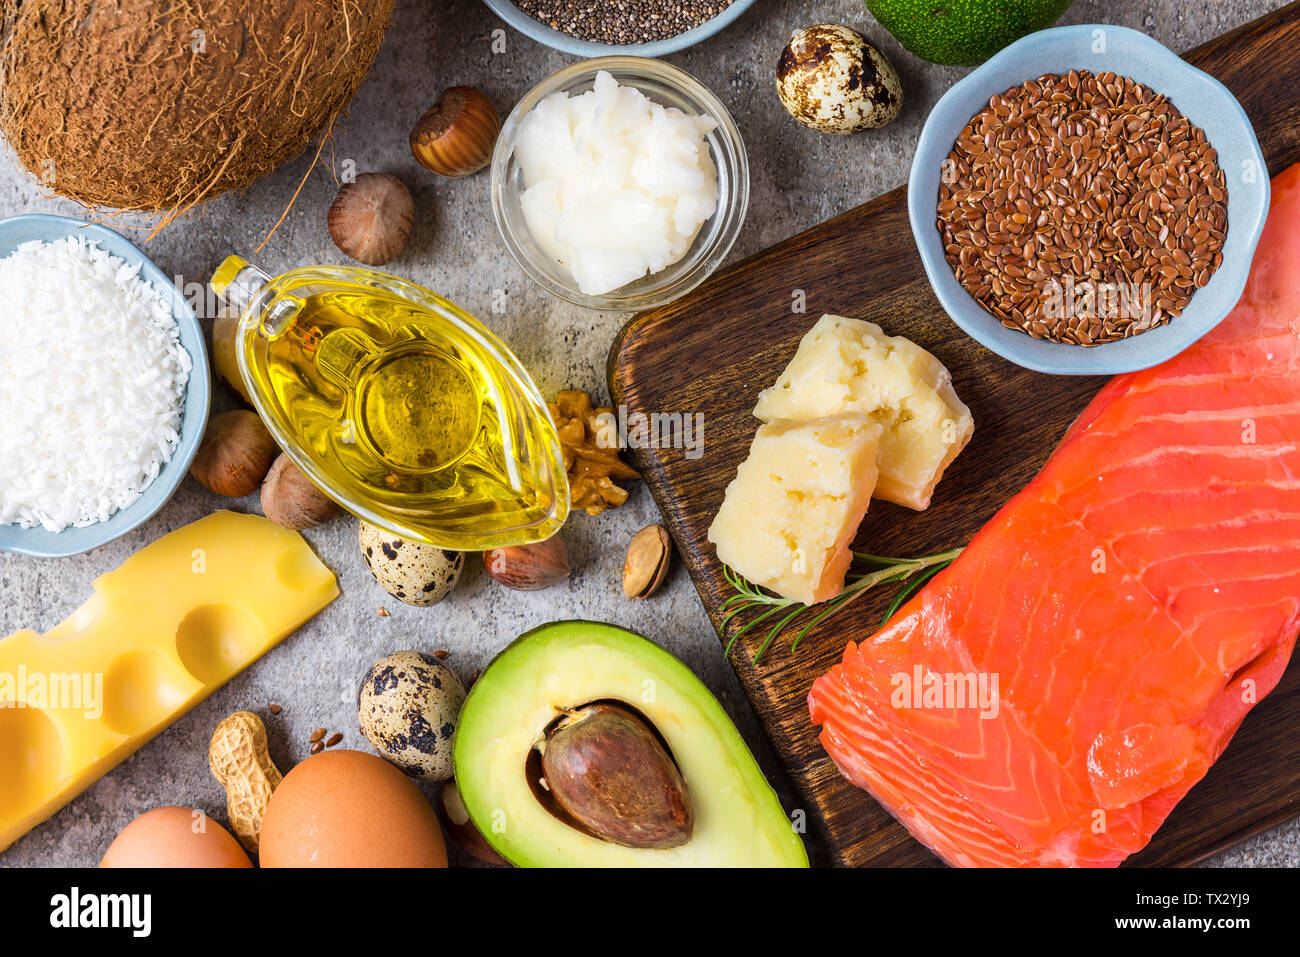 Healthy low carbs products. Ketogenic keto diet concept. Top view Stock Photo